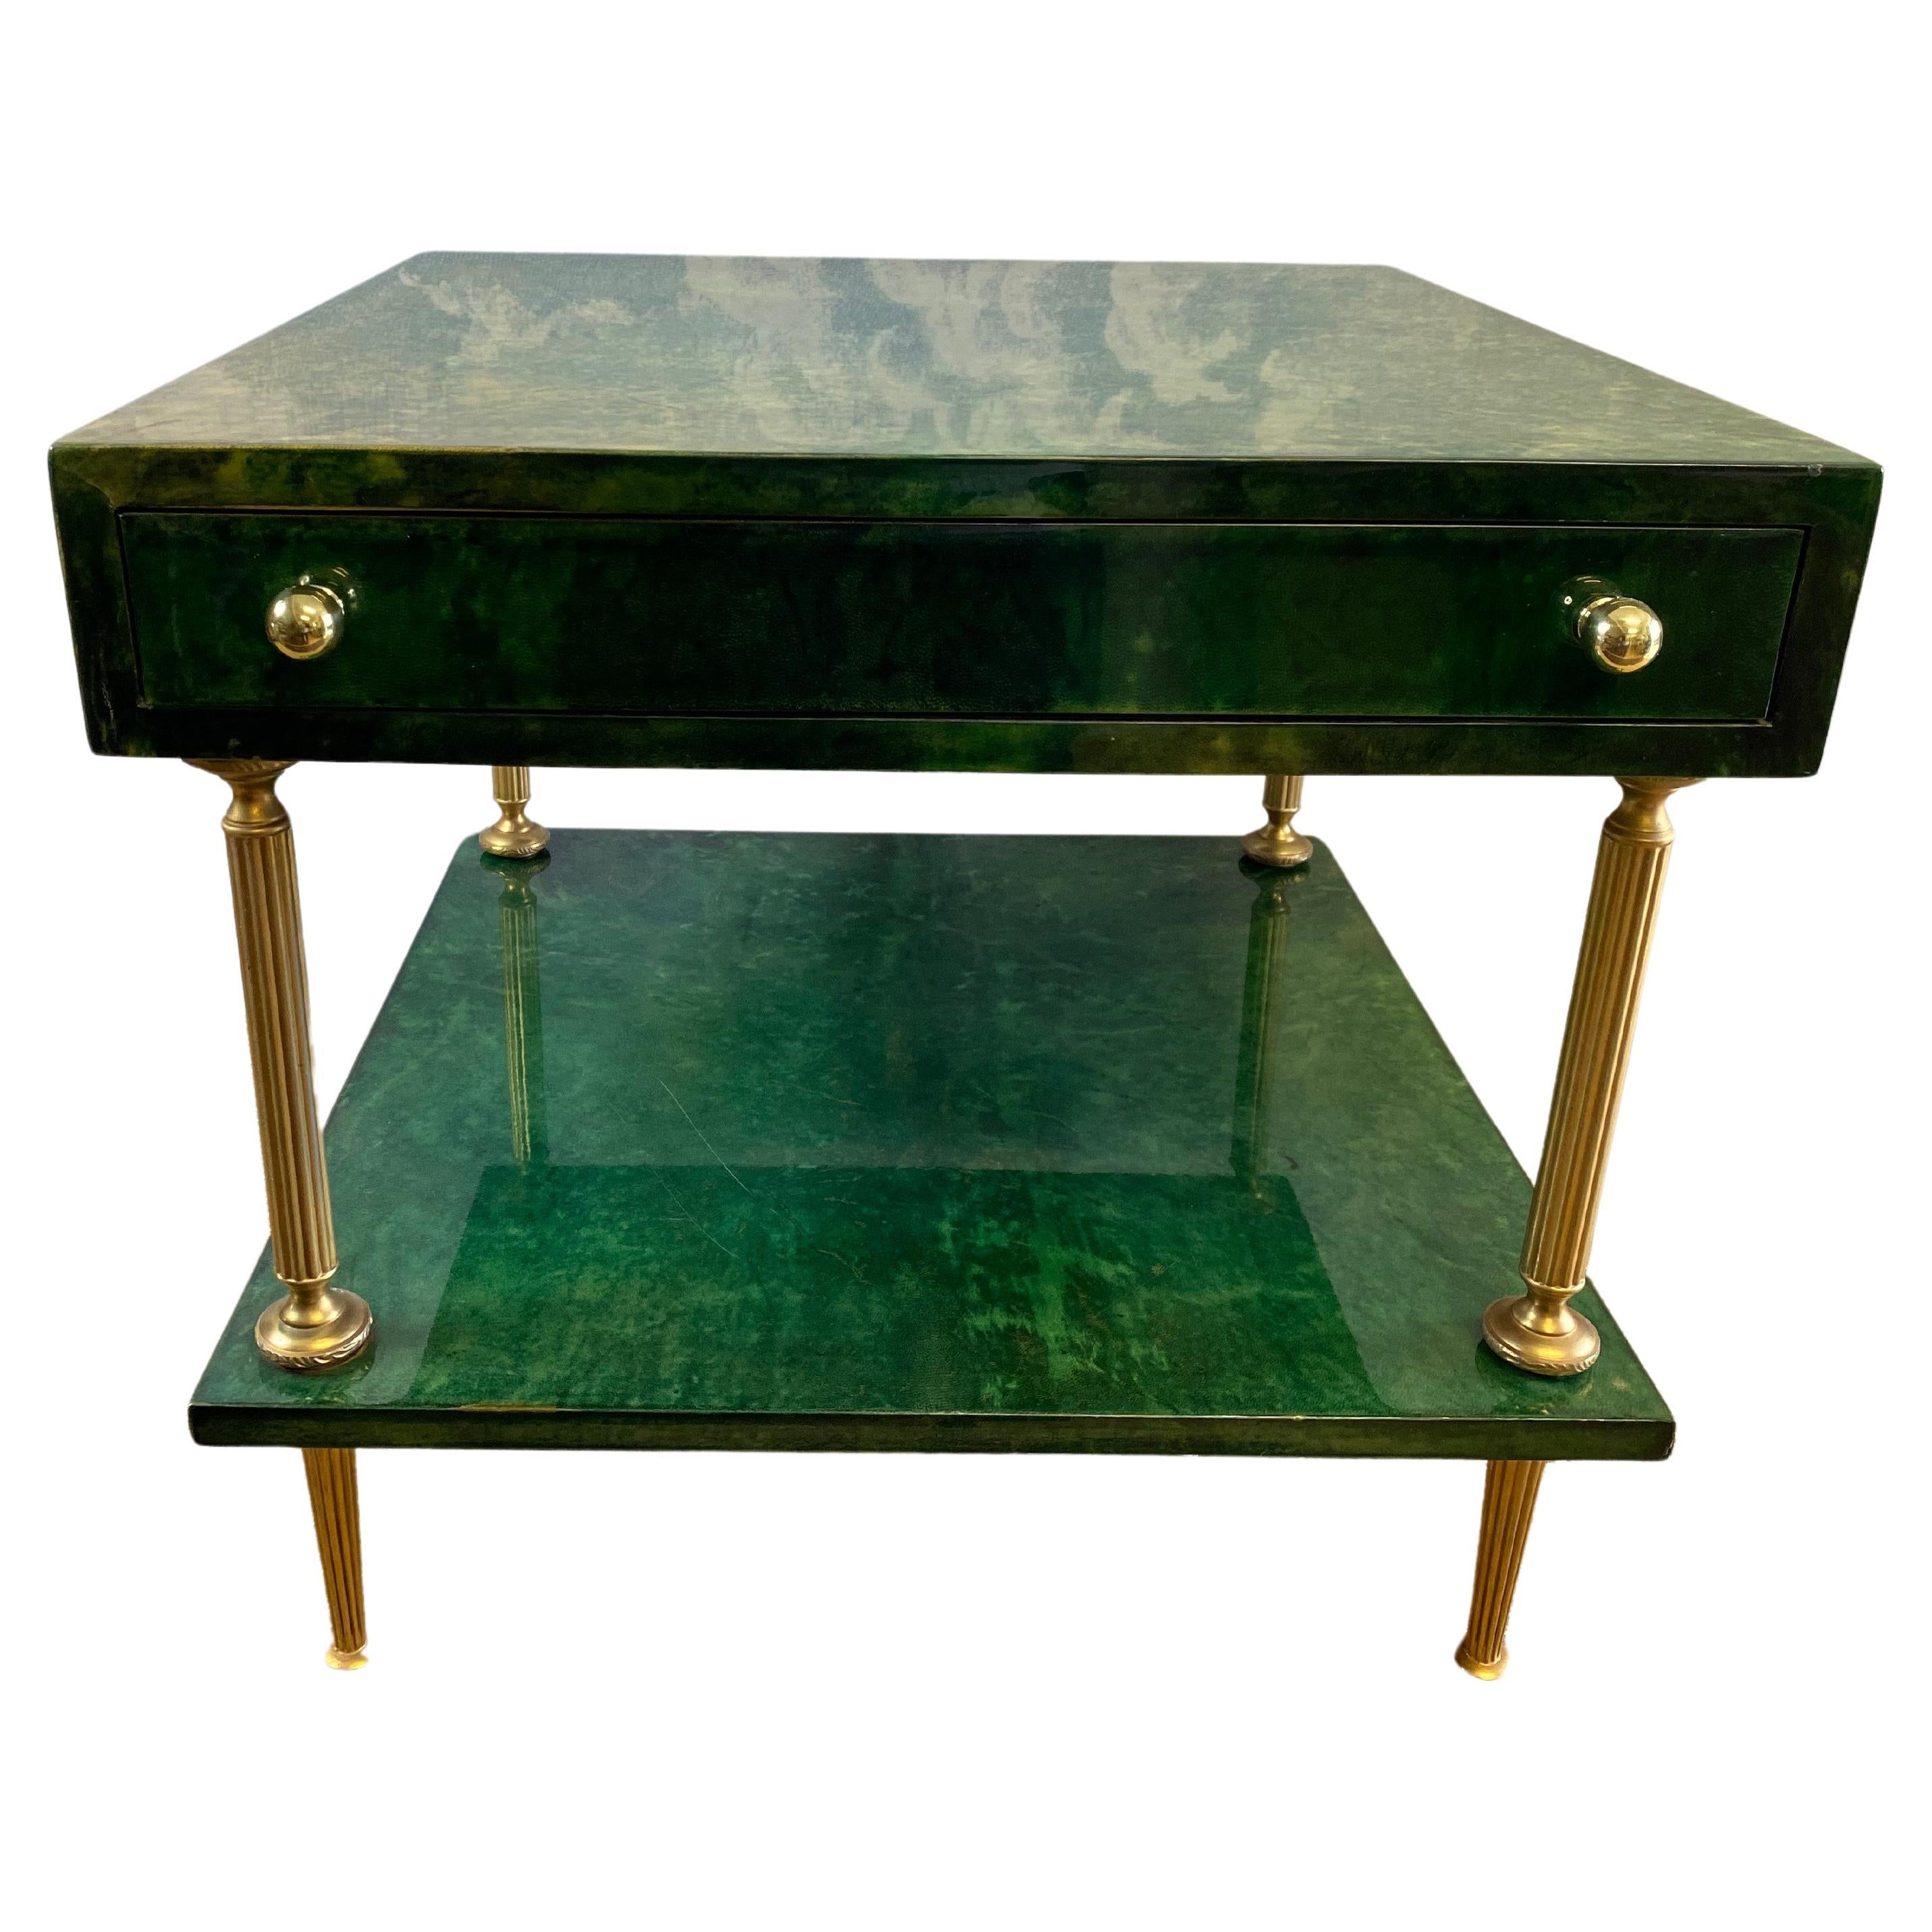 Aldo Tura Side Table in Emerald Green with Brass Legs and Two Drawers 